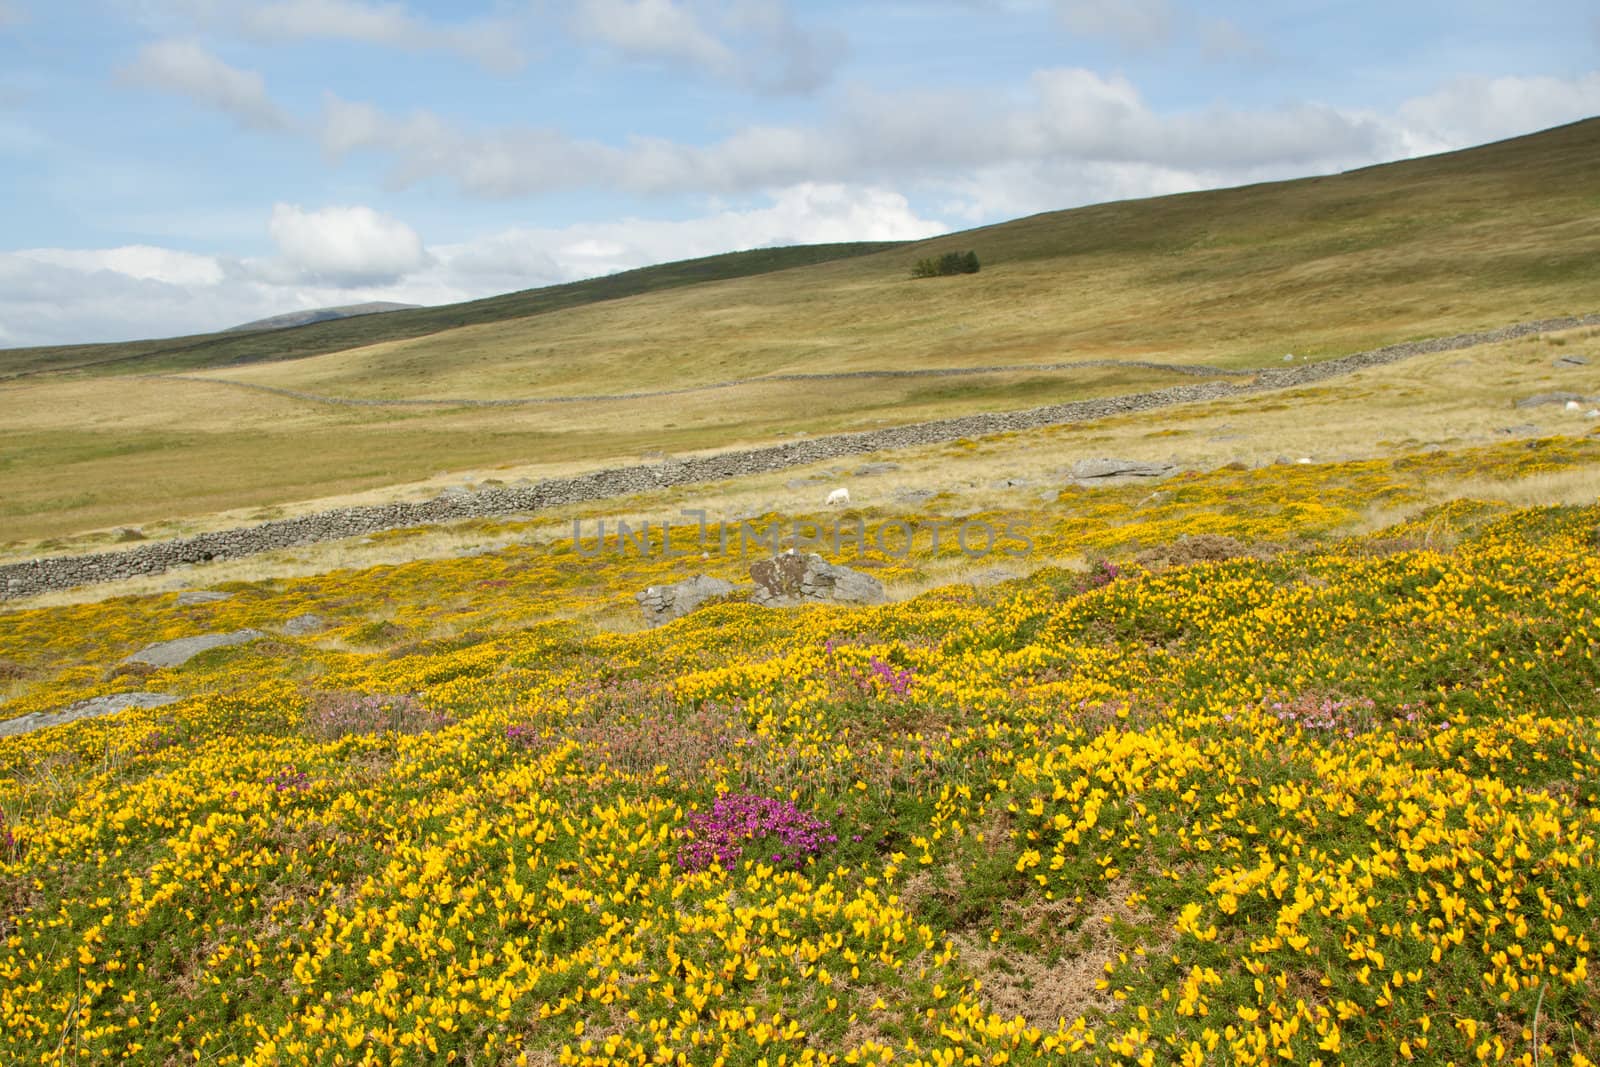 Hillside moorland with yellow gorse and purple heather flowers leading to a stone wall and grass fields, a blue cloudy sky in the distance.